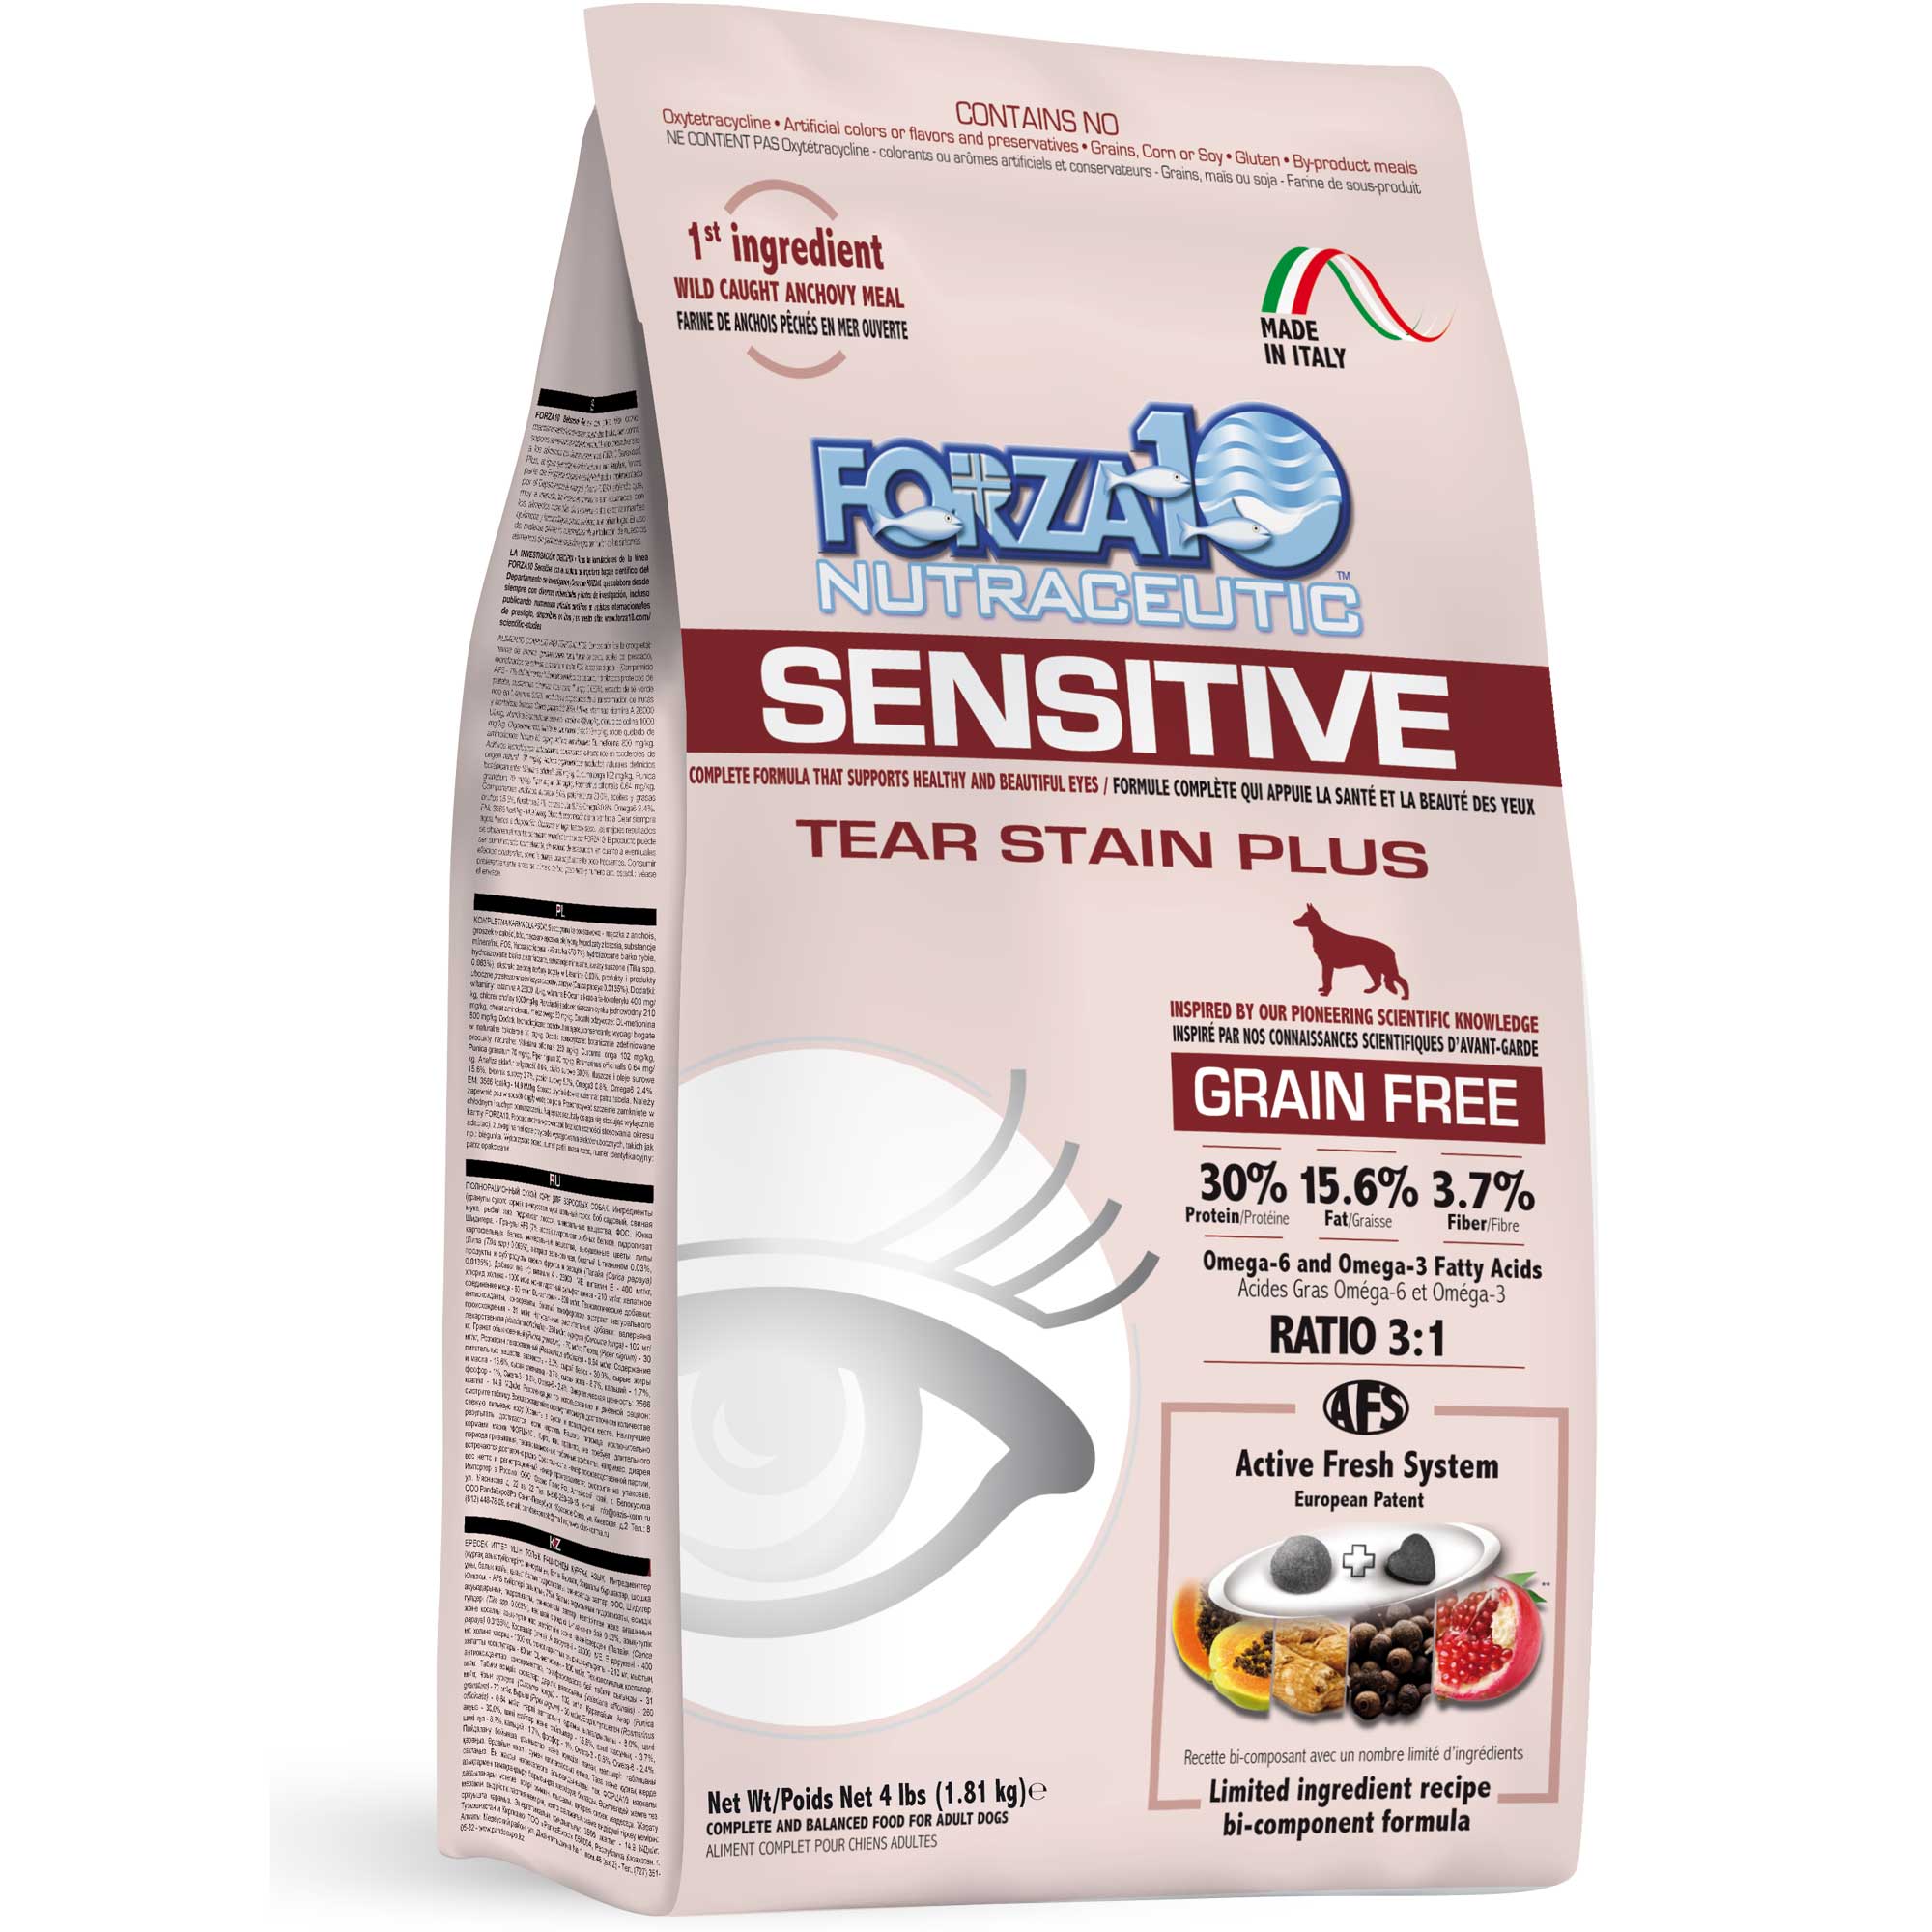 Forza10 Nutraceutic Sensitive Tear Stain Plus Grain Free Dry Dog Food Usage